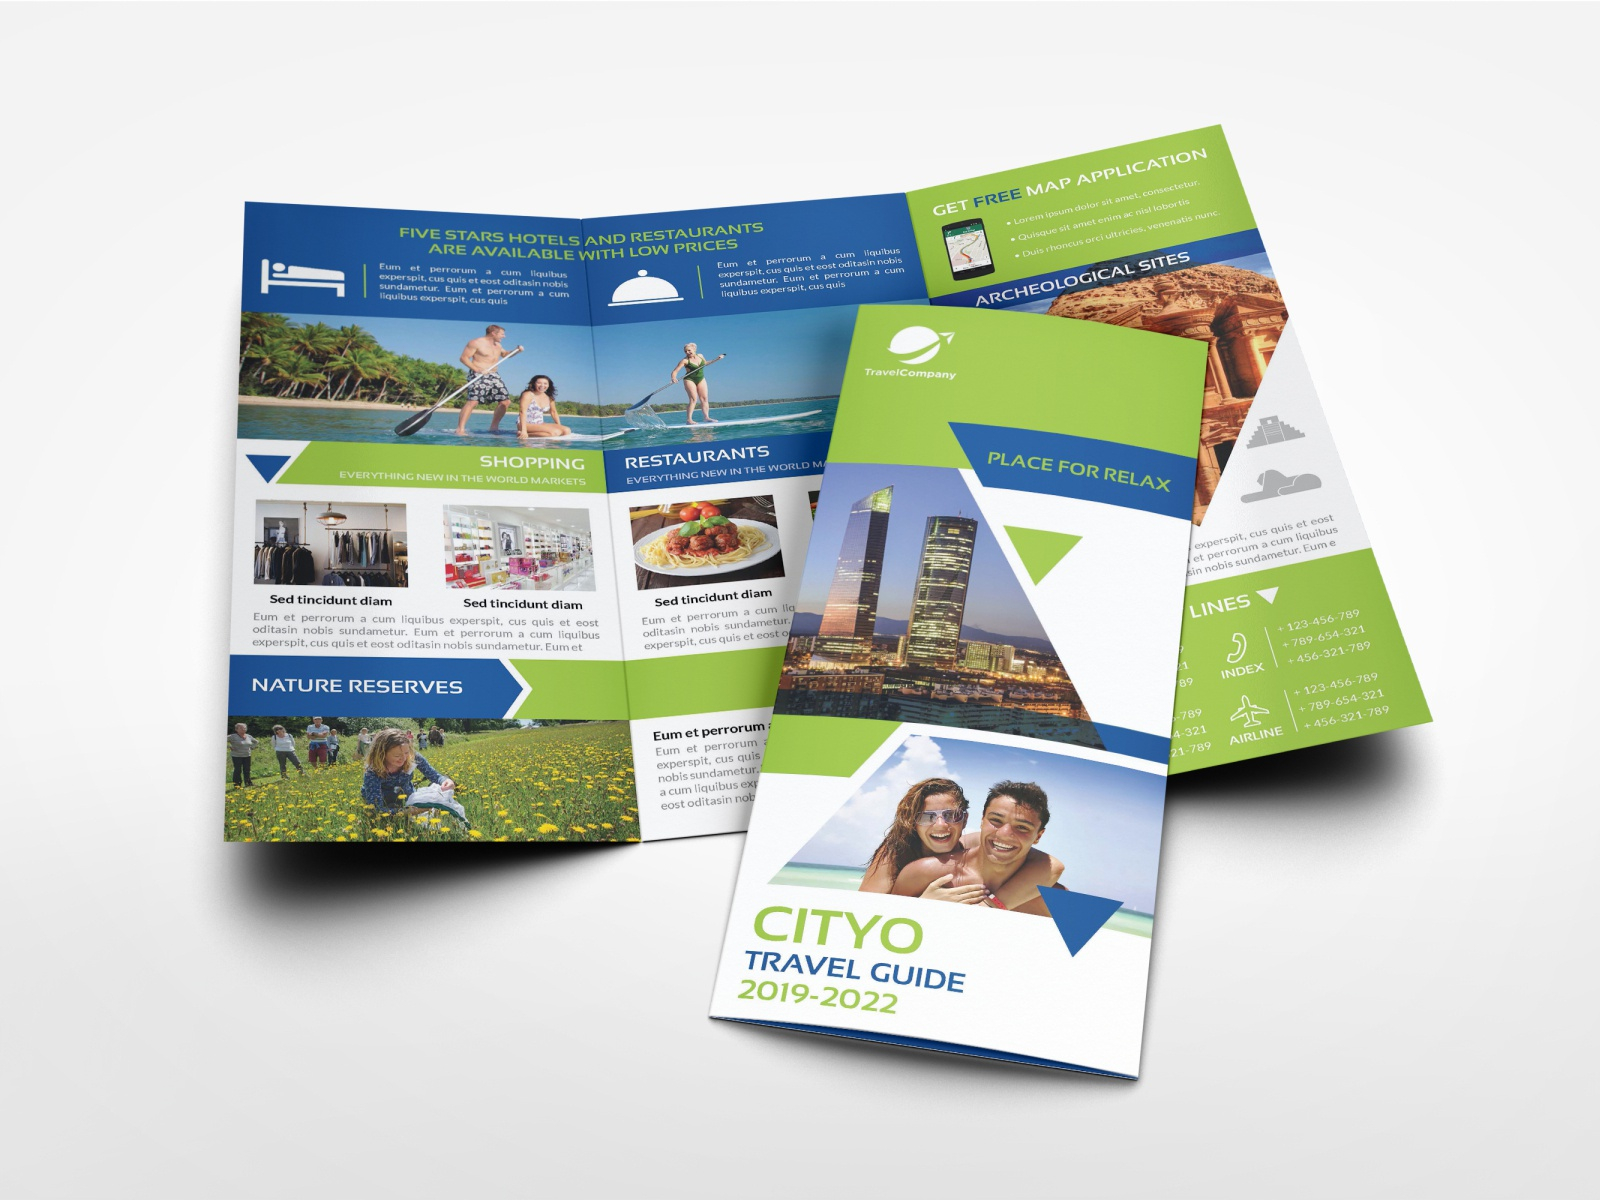 Travel Guide Tri Fold Brochure Template by OWPictures on Dribbble Regarding Travel Guide Brochure Template